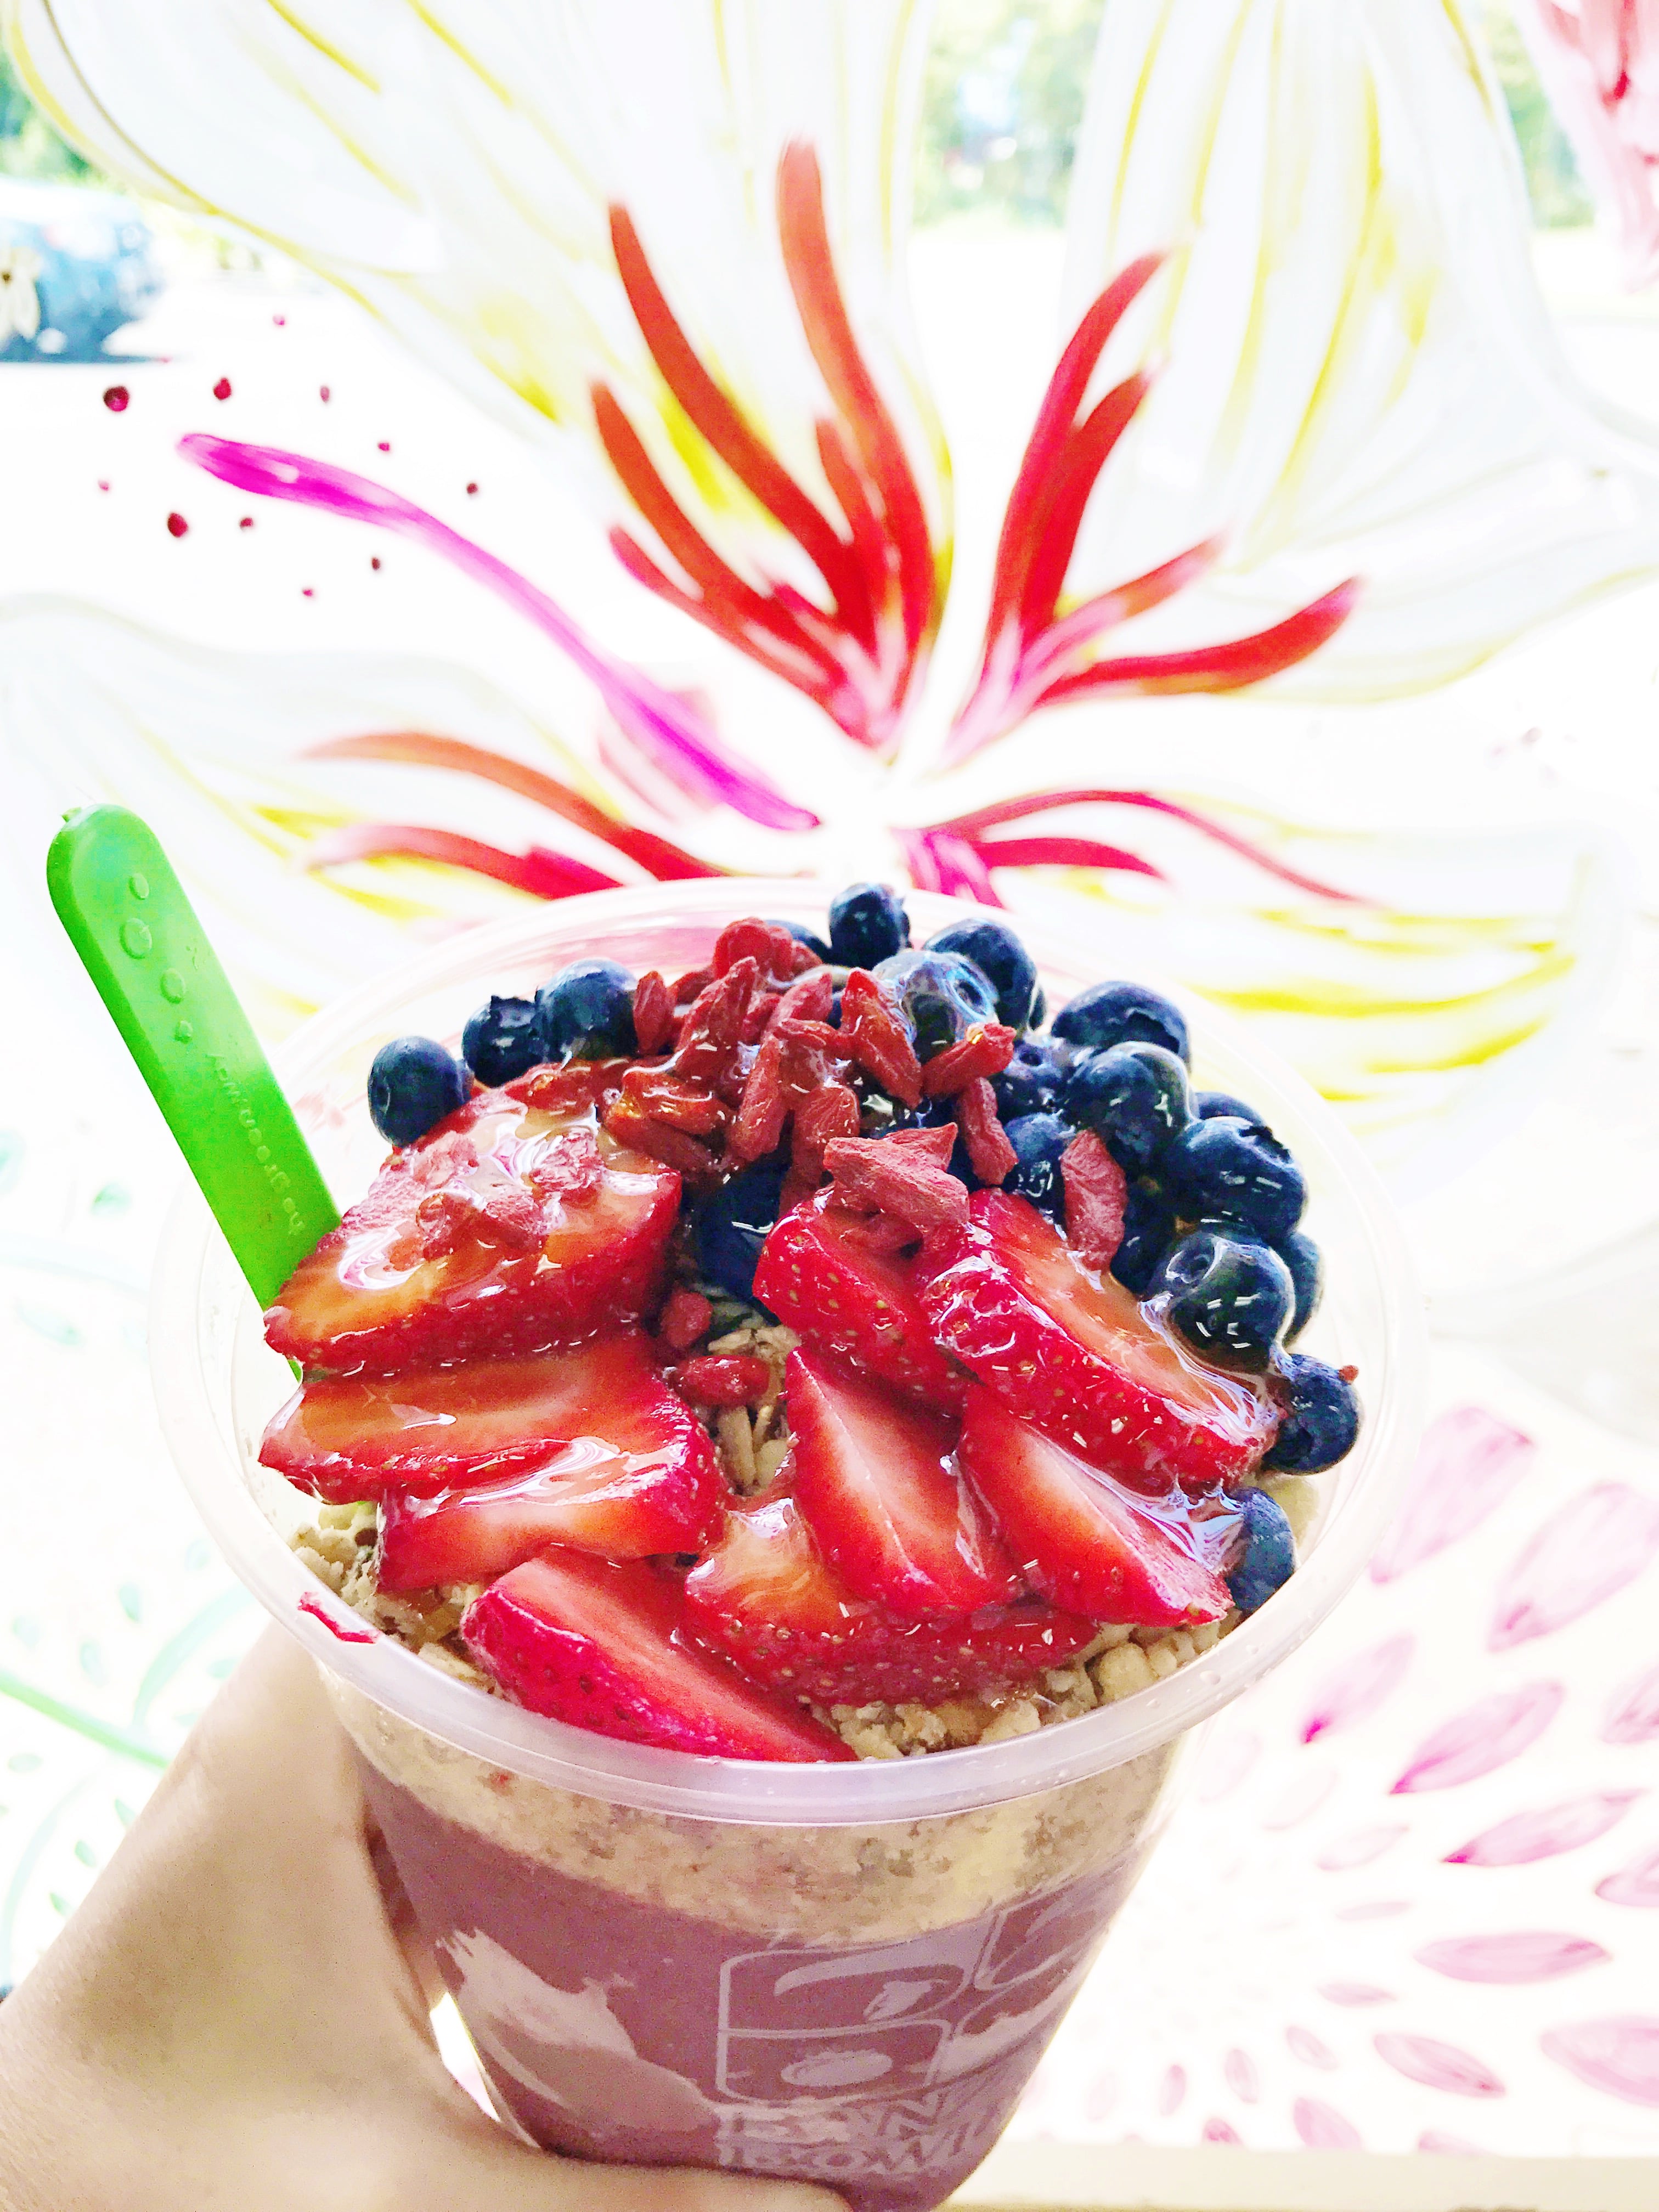 BEST ACAI BOWLS ON OAHU - Where to find the best acai bowls in Oahu, Hawaii + what to order when you get there! | Acai Bowls - Acai Bowls Oahu - Acai Bowls Hawaii - Acai Bowl Ideas - Best Acai Bowl Oahu - Best Acai Bowl Hawaii - Acai Bowl - Hawaii Travel Blog - #hawaii #oahu #acaibowl